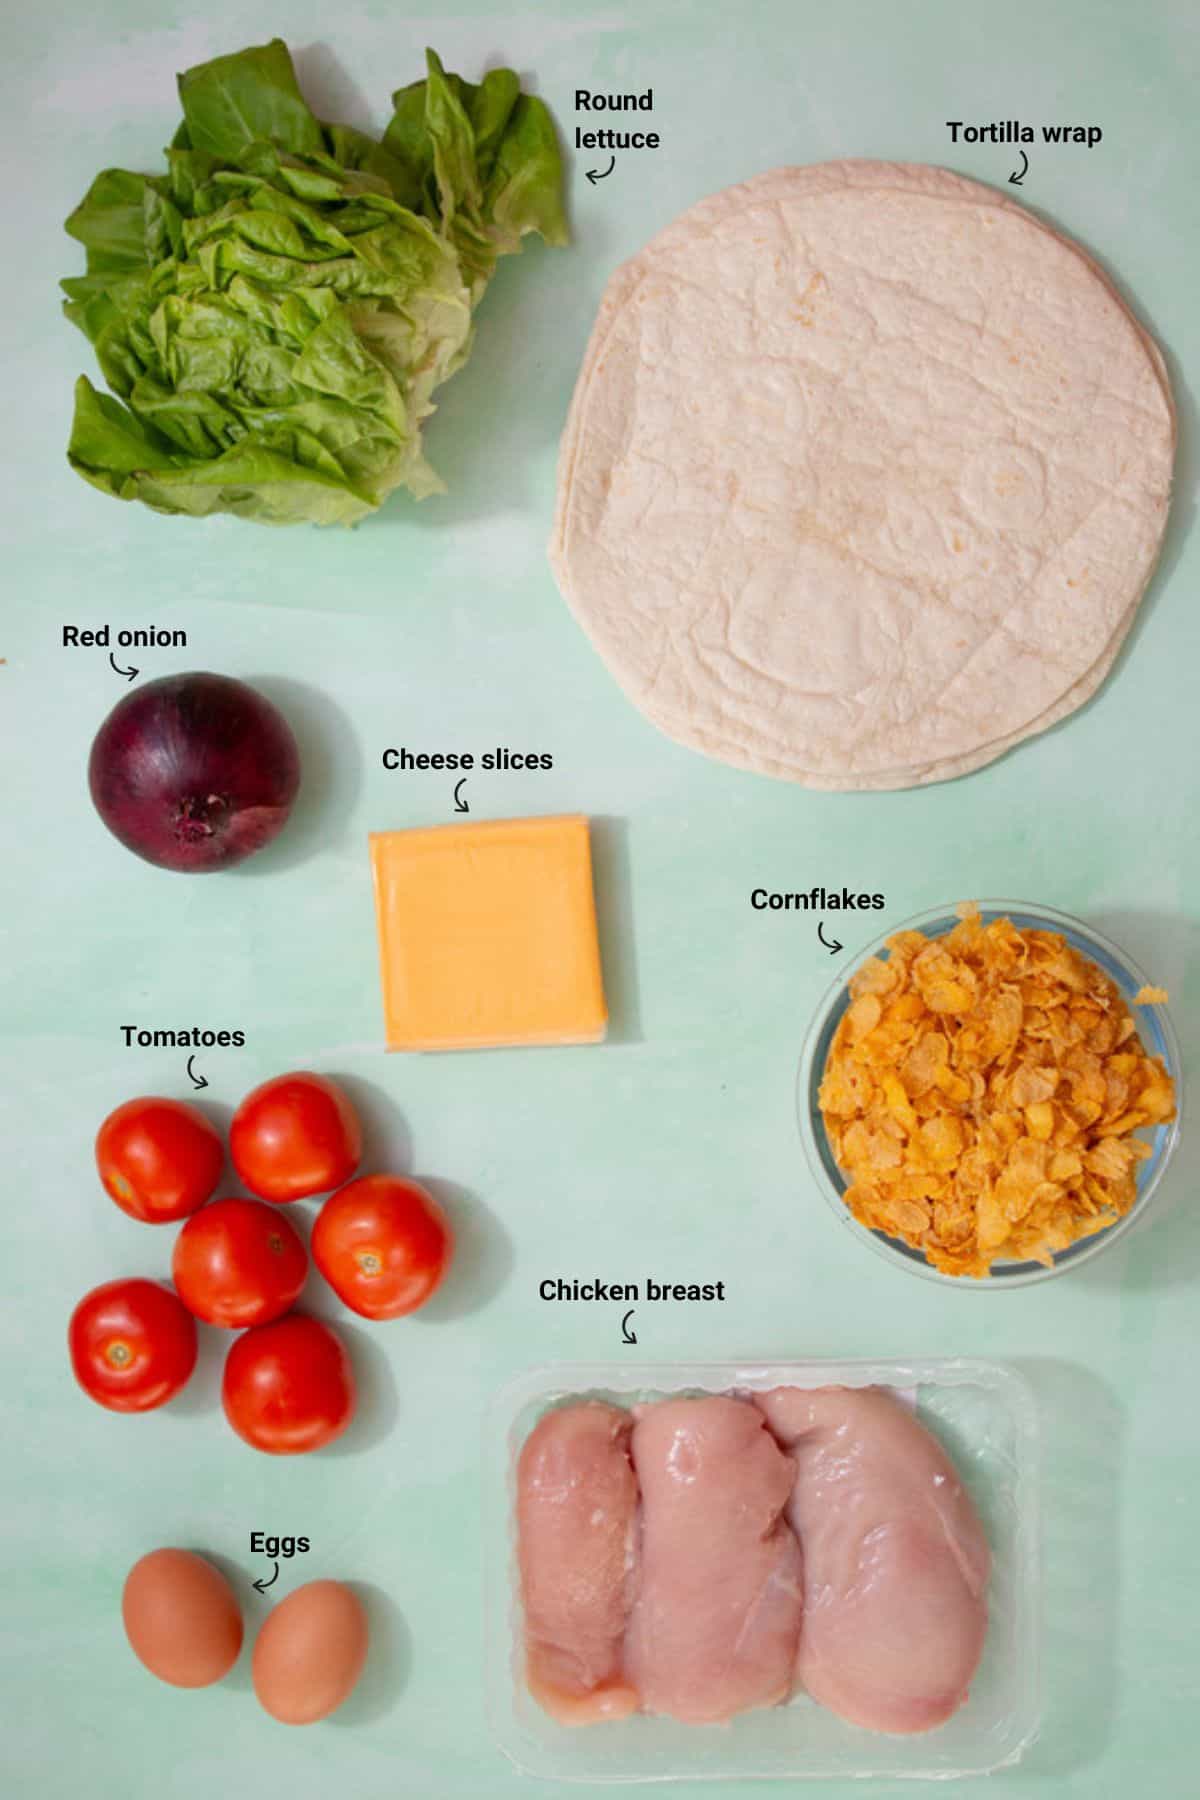 Ingredients to make the chicken wrap recipes laid out on a pale blue background and labelled.